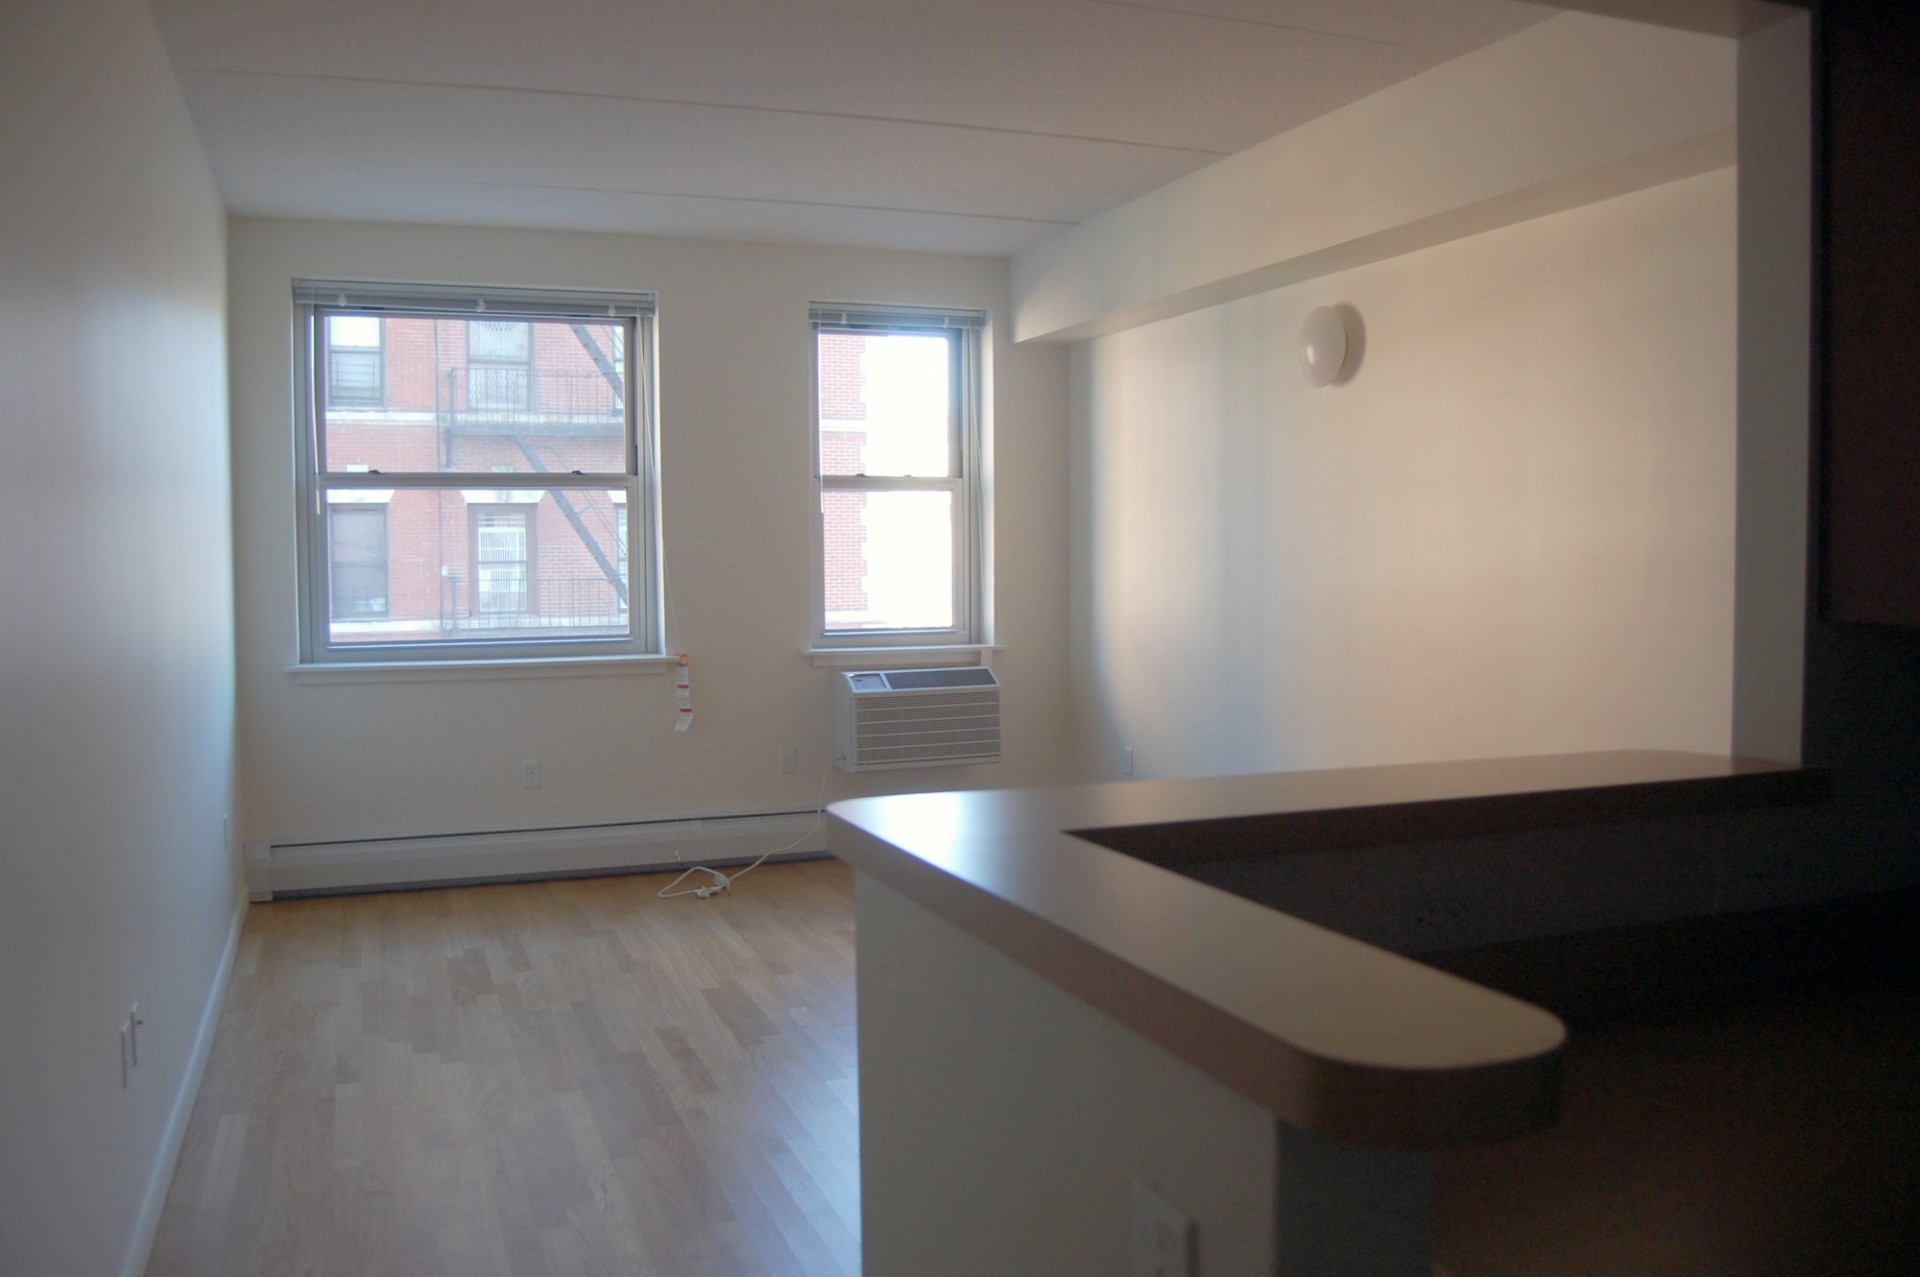 The interior of an apartment at 3595 Broadway.